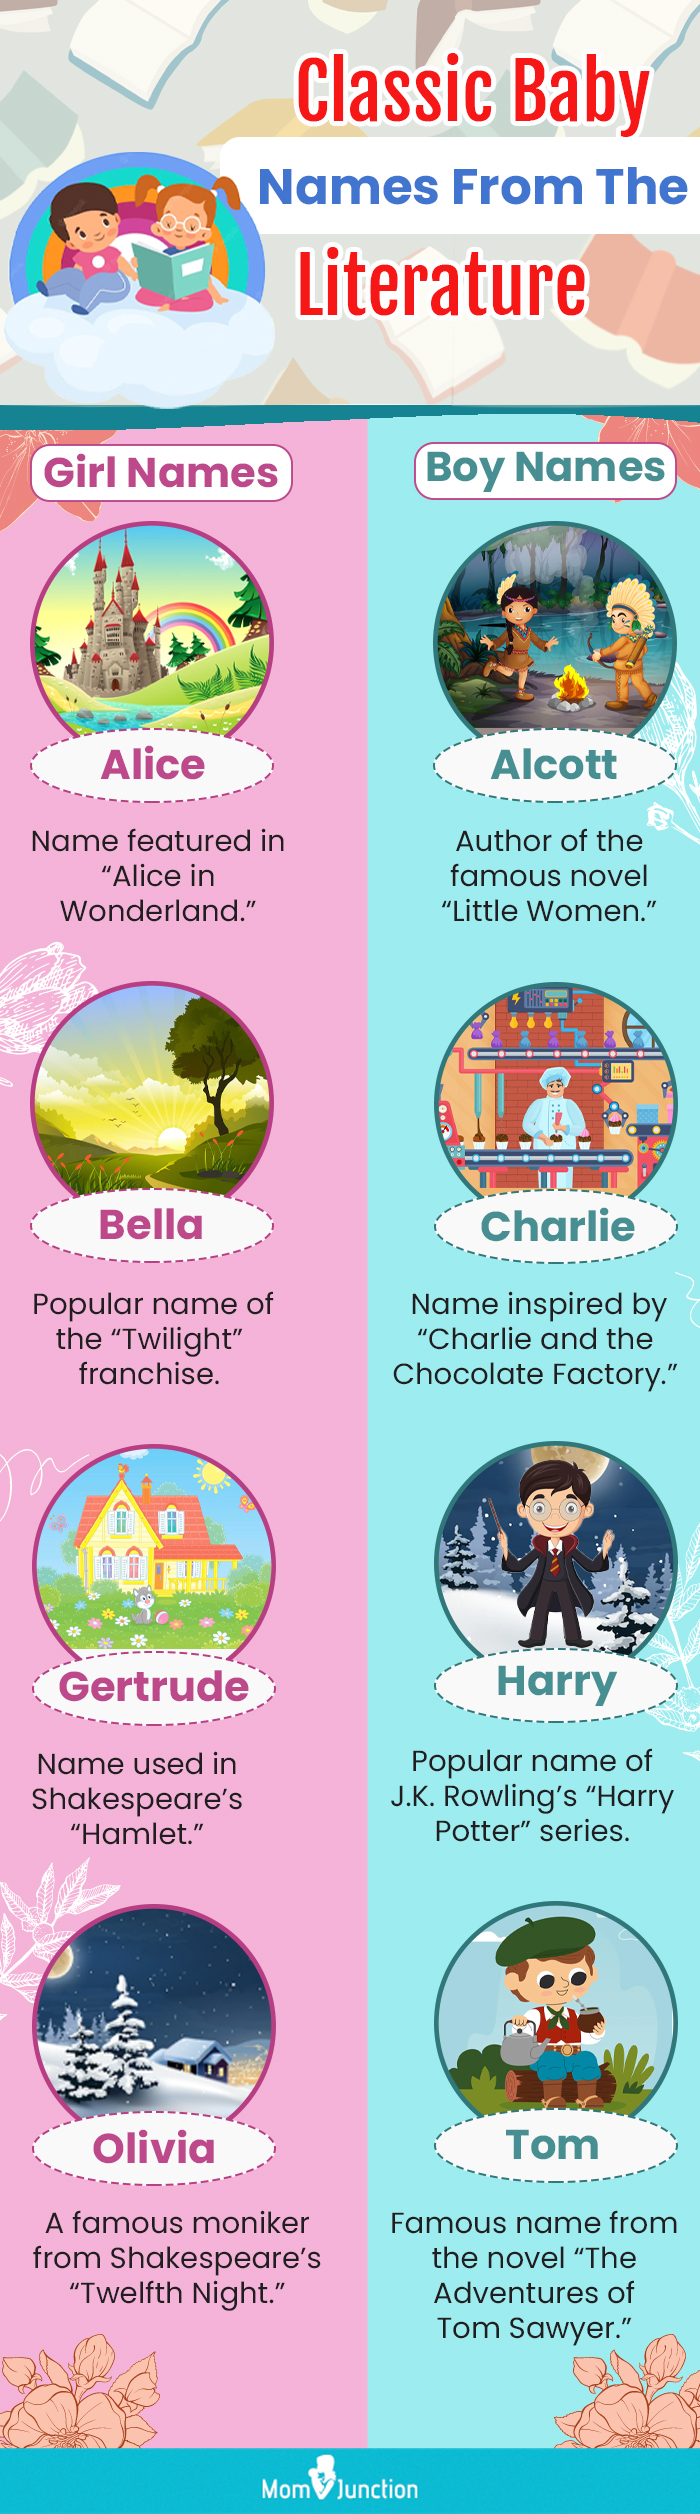 Literary Character Names for Baby Boys, Parenting